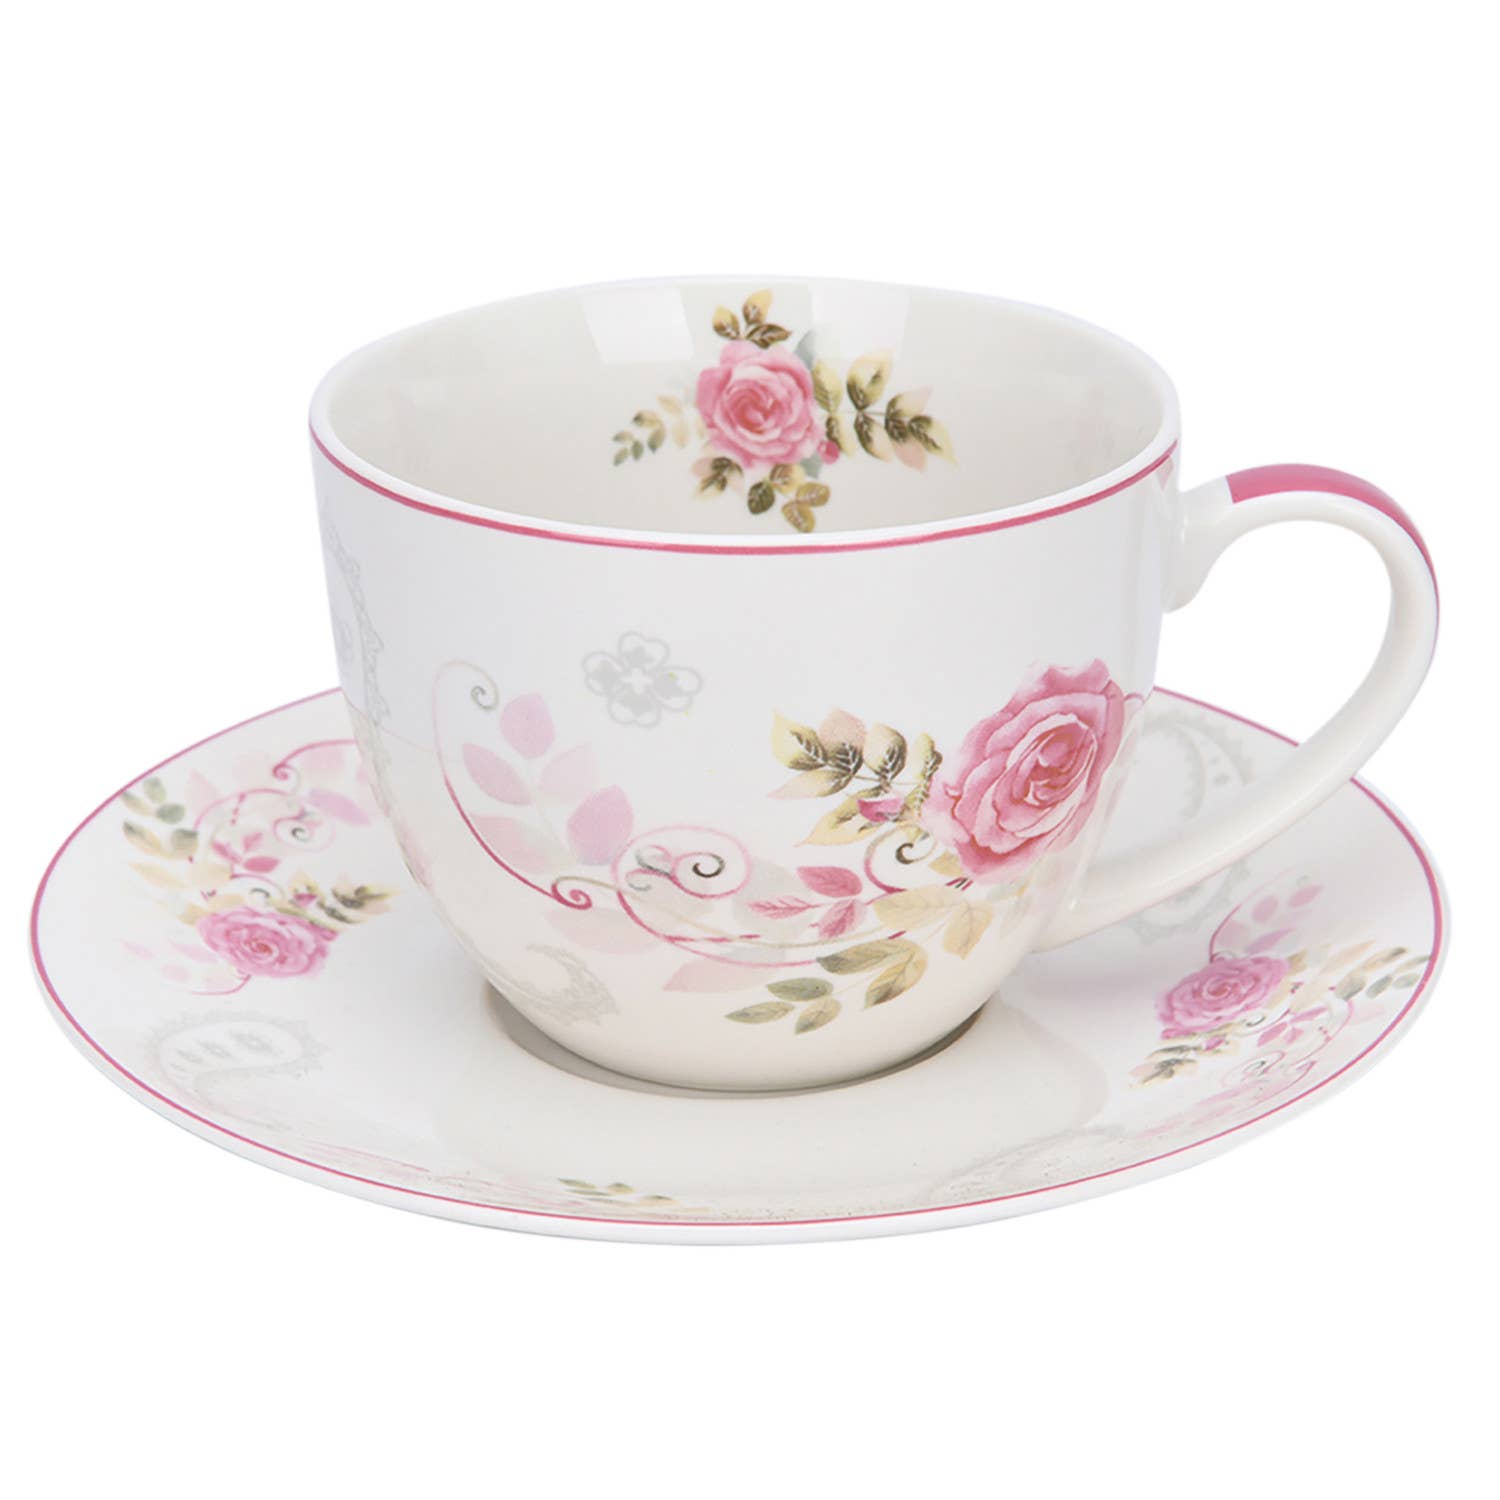 Tea Set for Six Pink Floral Tea Cups and Saucers Mismatched 